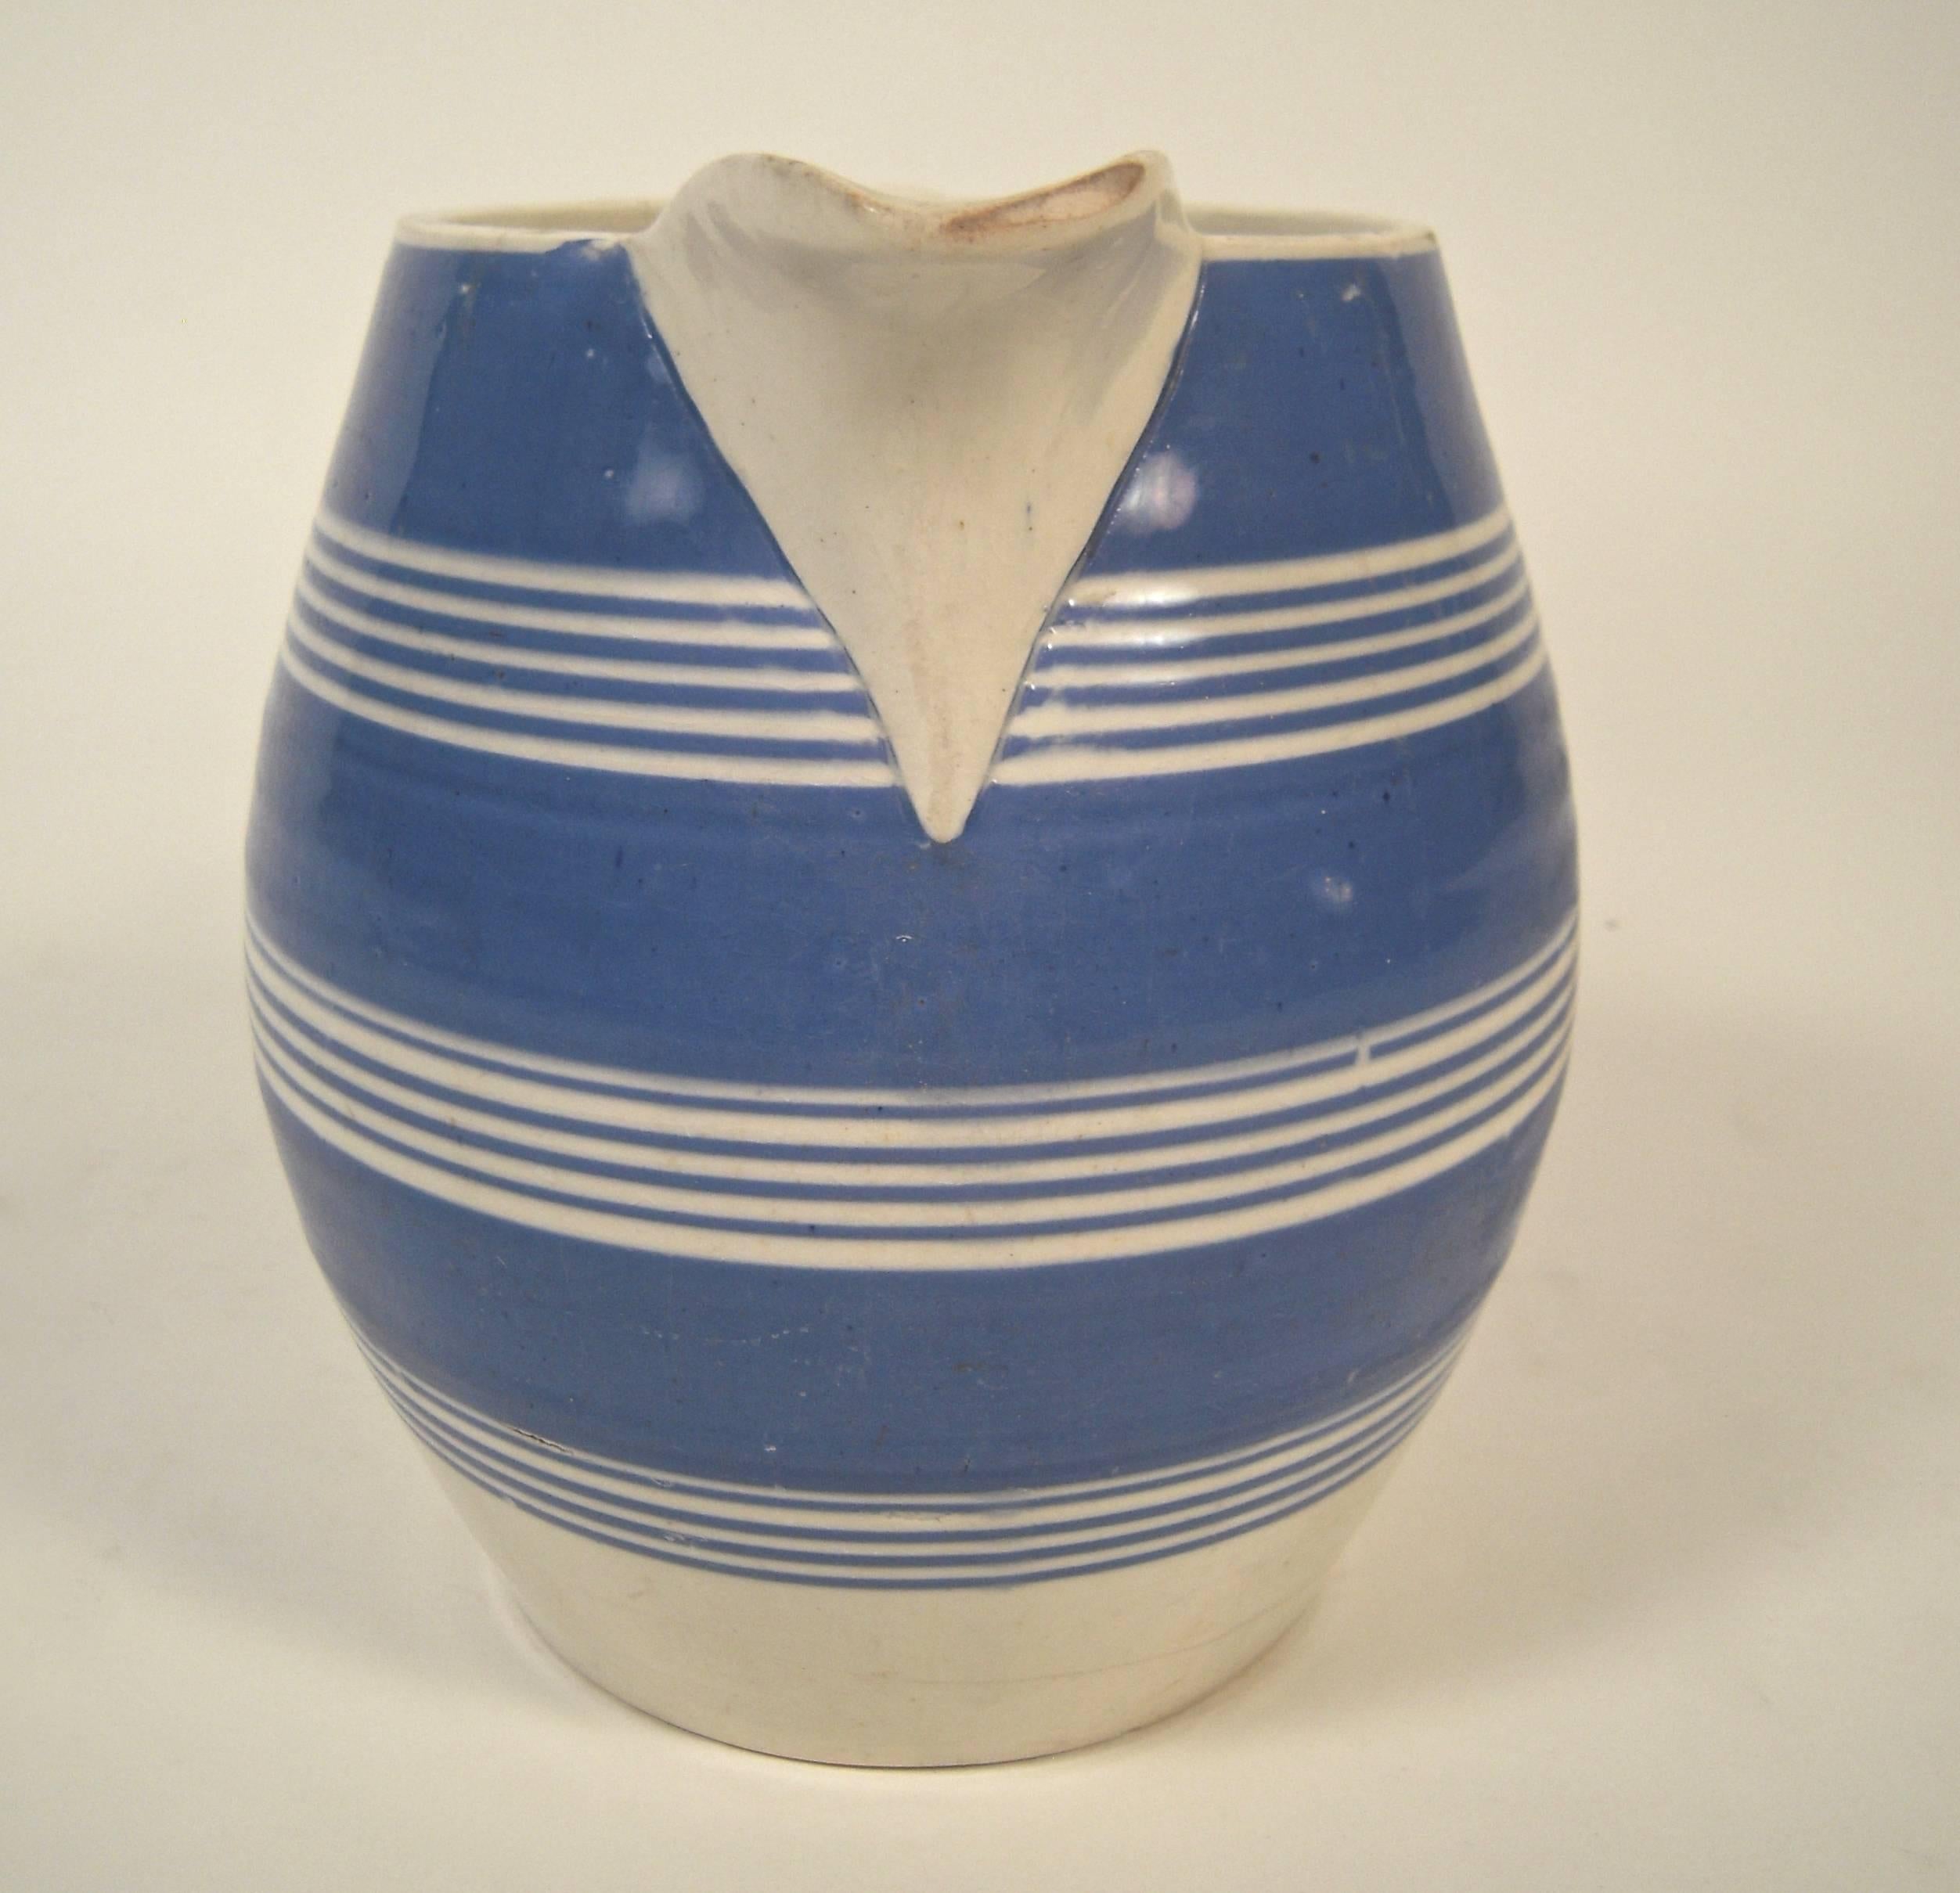 A beautiful, large mochaware barrel form pitcher, decorated with blue and white stripes of alternating thickness, Staffordshire, England, circa 1870-80.